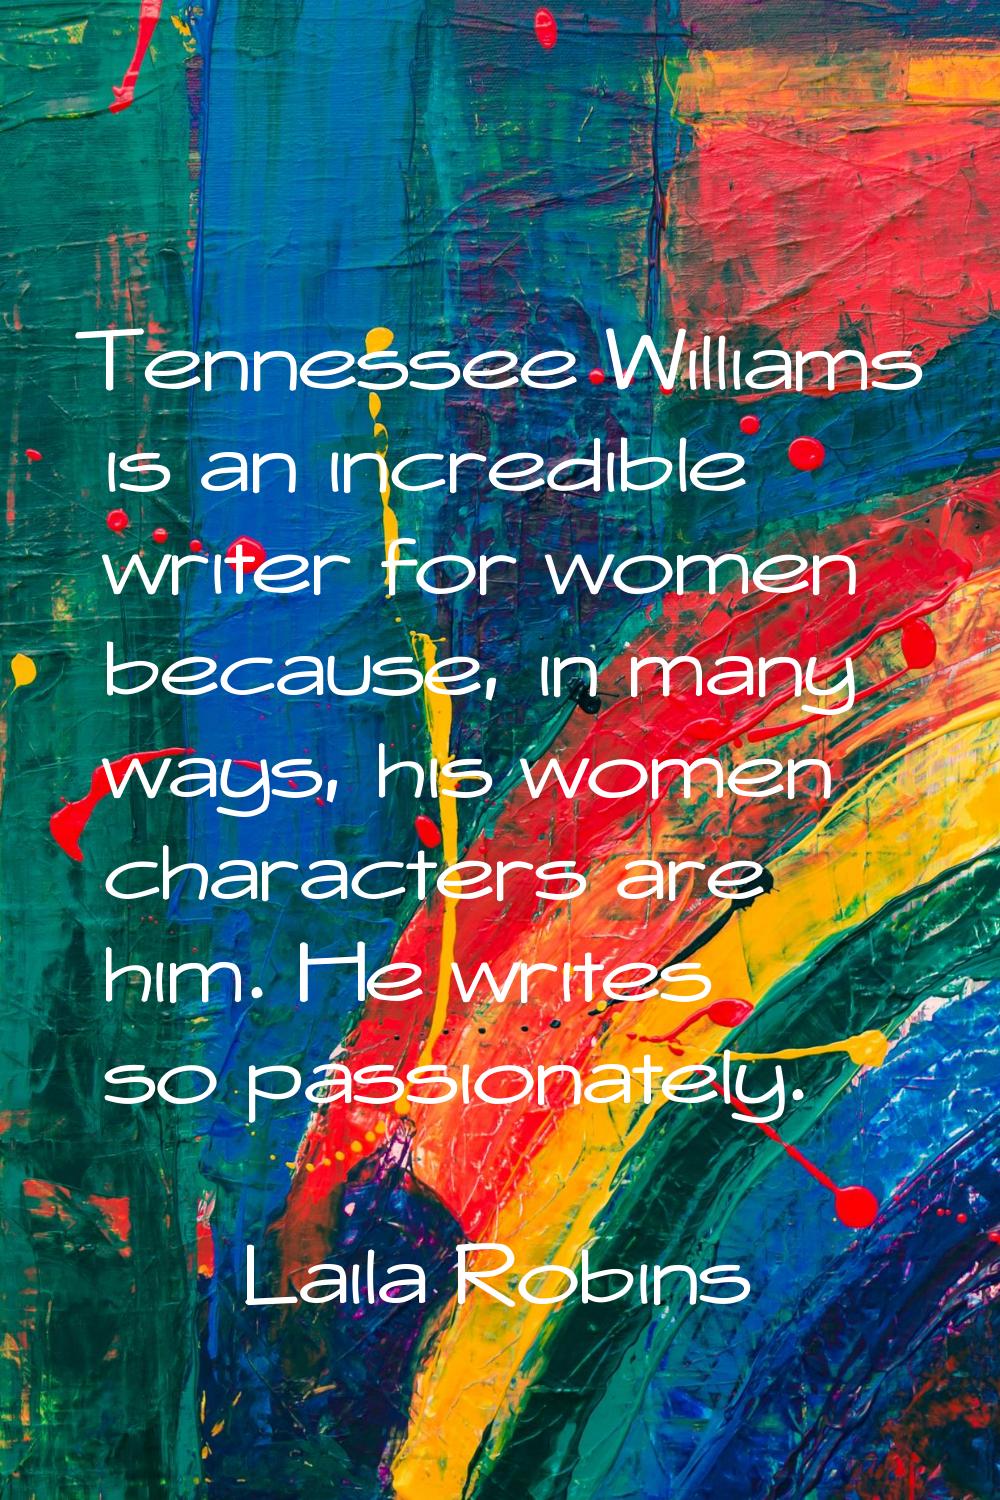 Tennessee Williams is an incredible writer for women because, in many ways, his women characters ar